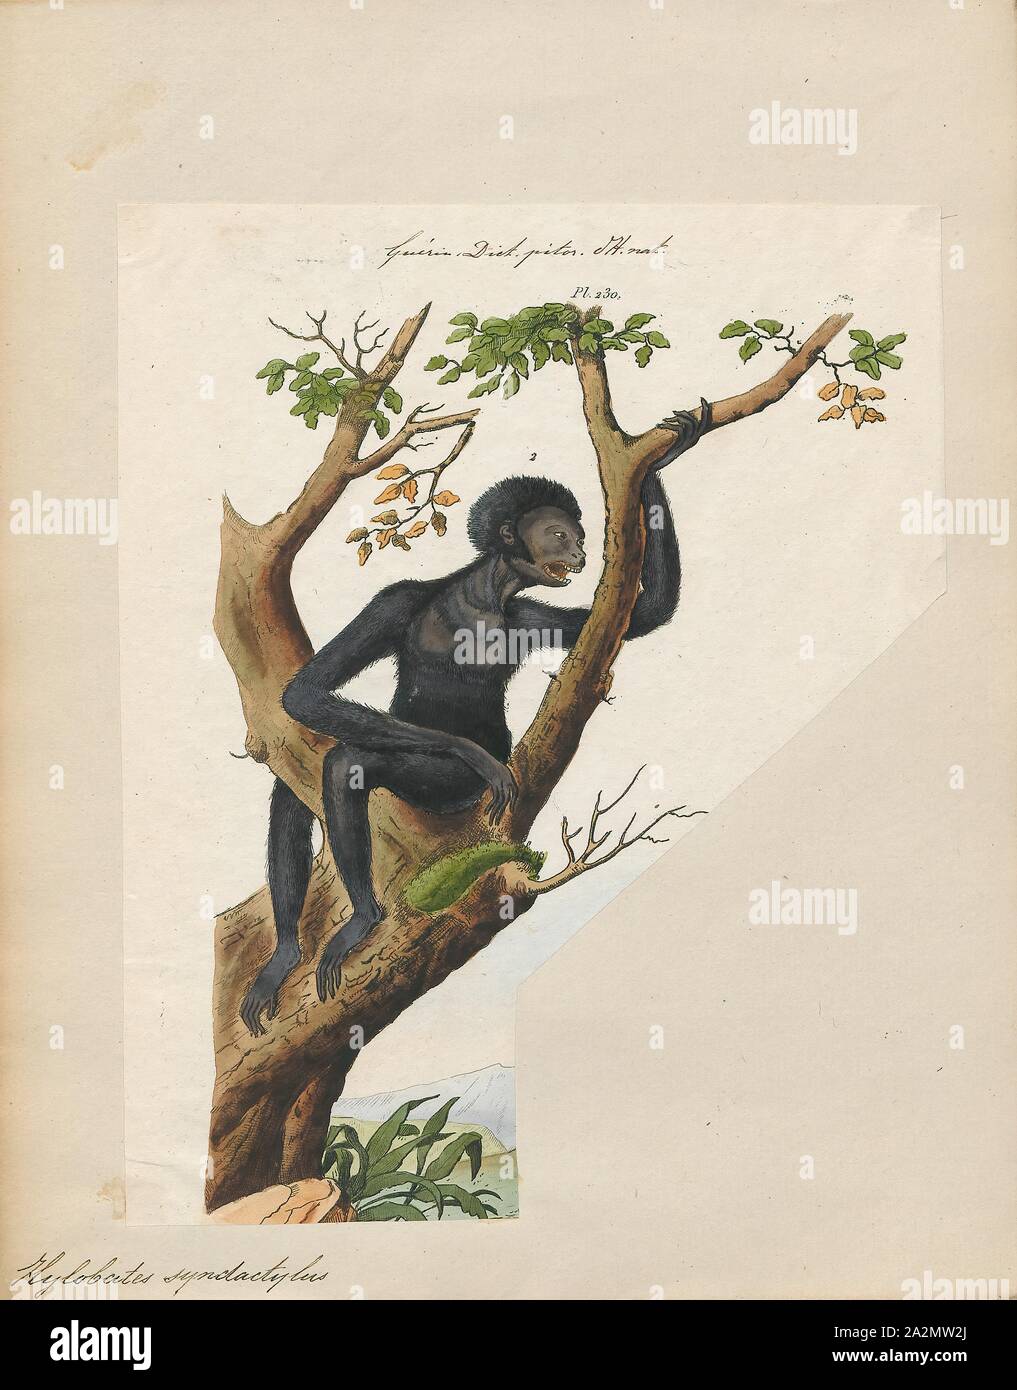 Hylobates syndactylus, Print, The siamang (Symphalangus syndactylus) is an arboreal black-furred gibbon native to the forests of Indonesia, Malaysia and Thailand. The largest of the gibbons, the siamang can be twice the size of other gibbons, reaching 1 m in height, and weighing up to 14 kg. The siamang is the only species in the genus Symphalangus., 1700-1880 Stock Photo